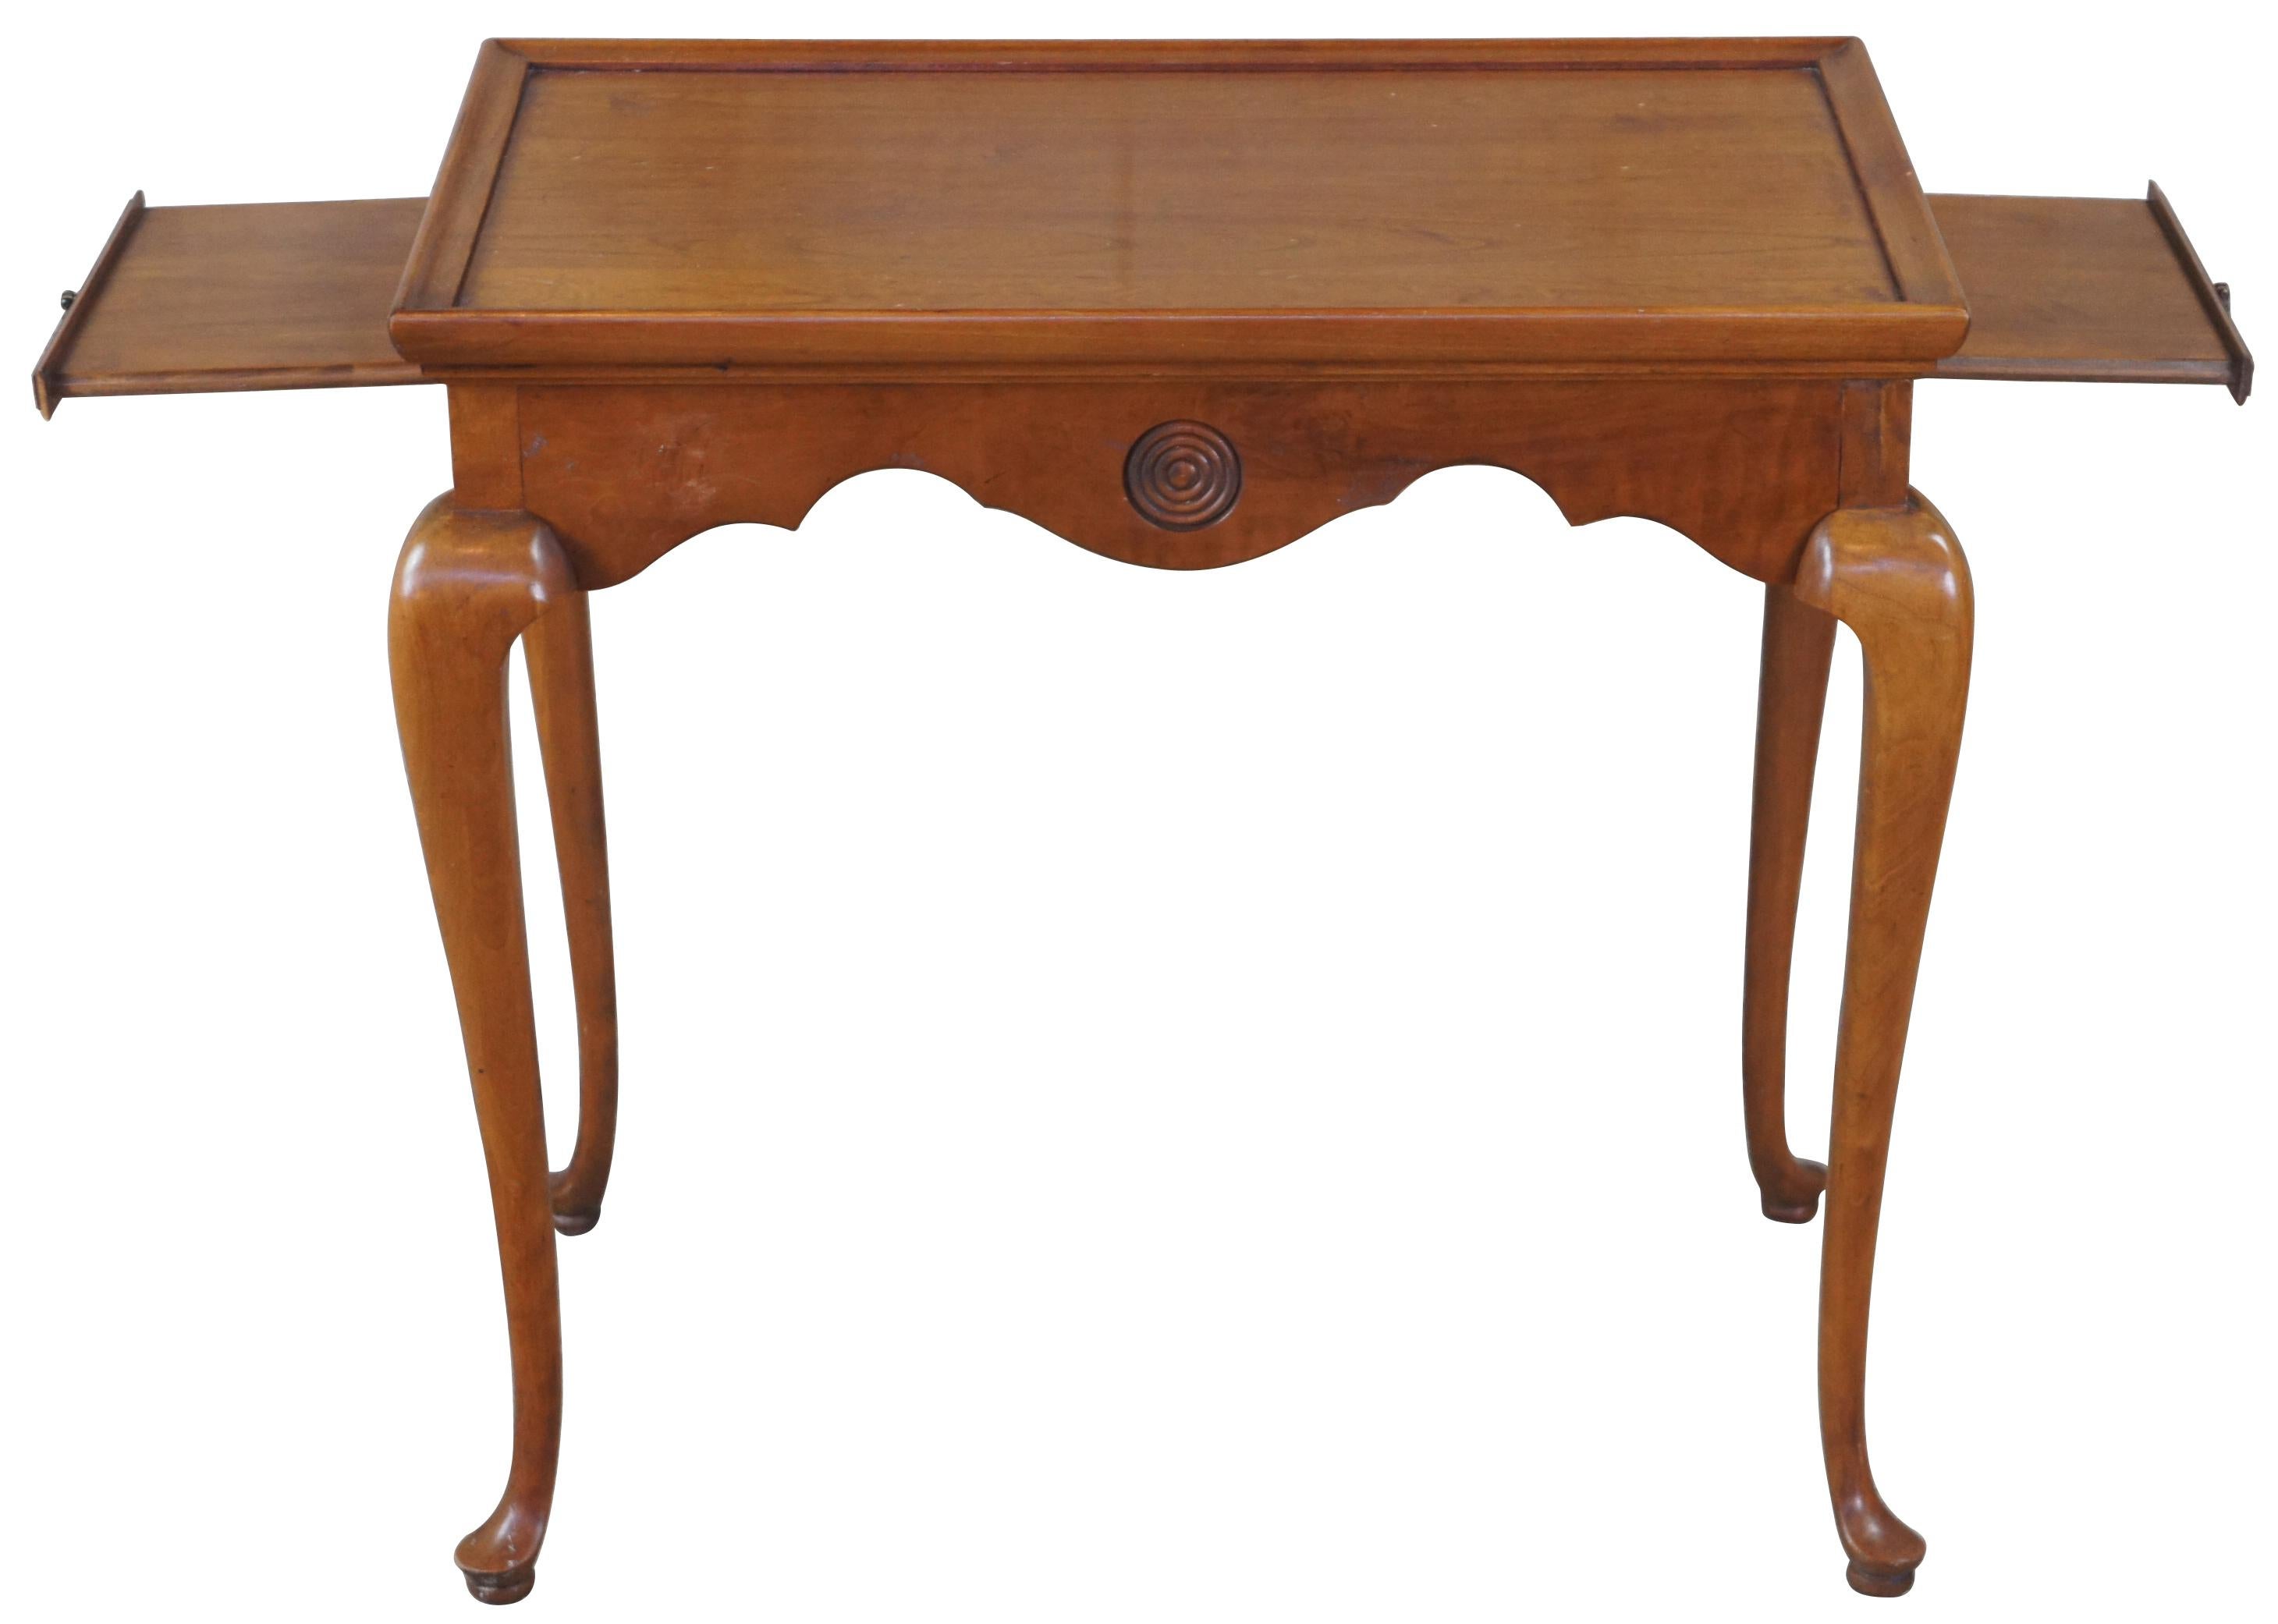 1967 Thomasville Tray Table. T-29-6375-17. Made from solid cherry in Queen Anne Styling. Features a rectangular form with rectangular inset top over a serpentine apron with pull out drink trays. The table is supported by long cabriole legs leading